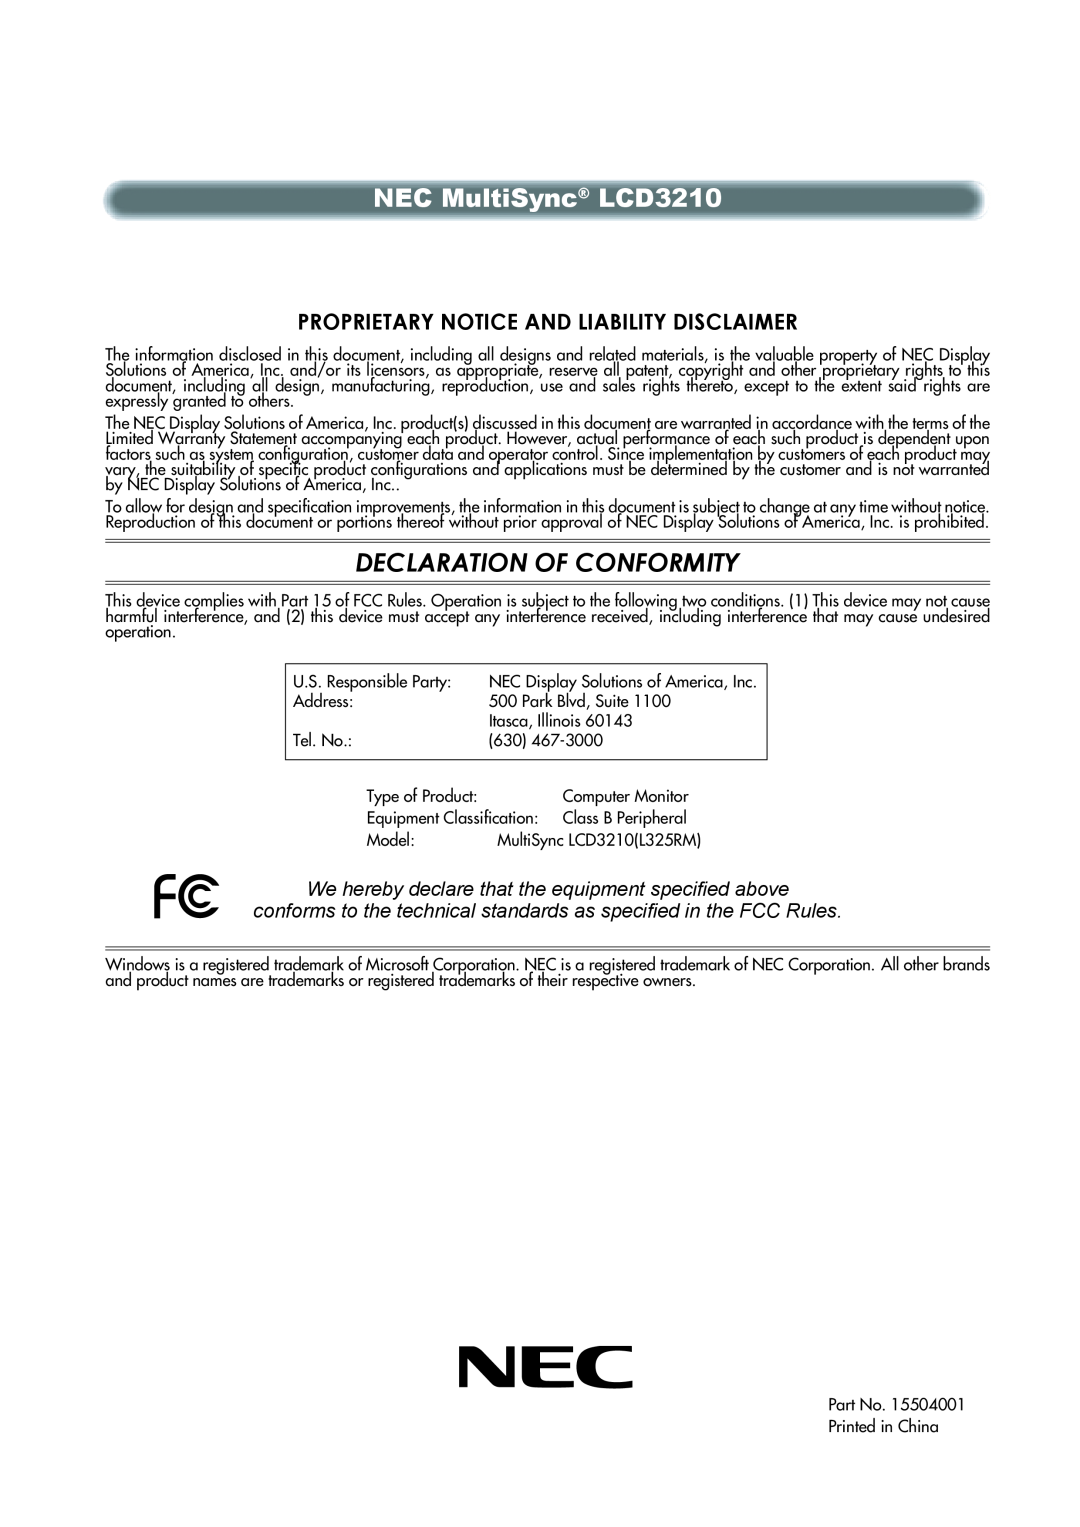 NEC manual Proprietary Notice And Liability Disclaimer, NEC MultiSync LCD3210, Declaration Of Conformity 